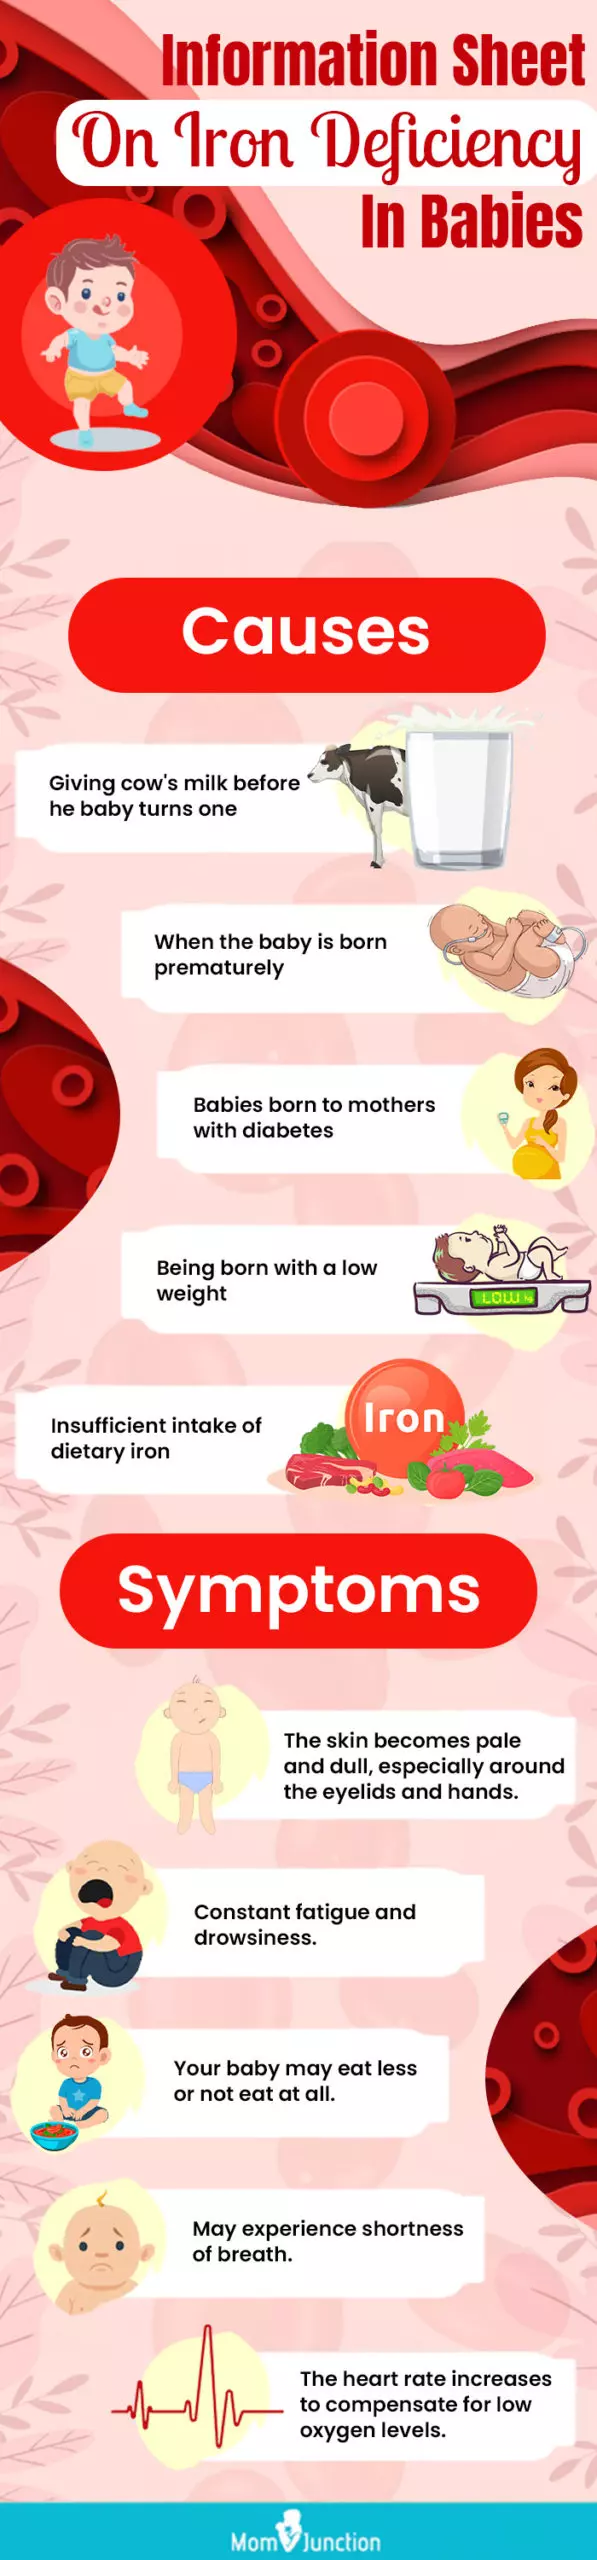 iron deficiency in babies-recovered (infographic)